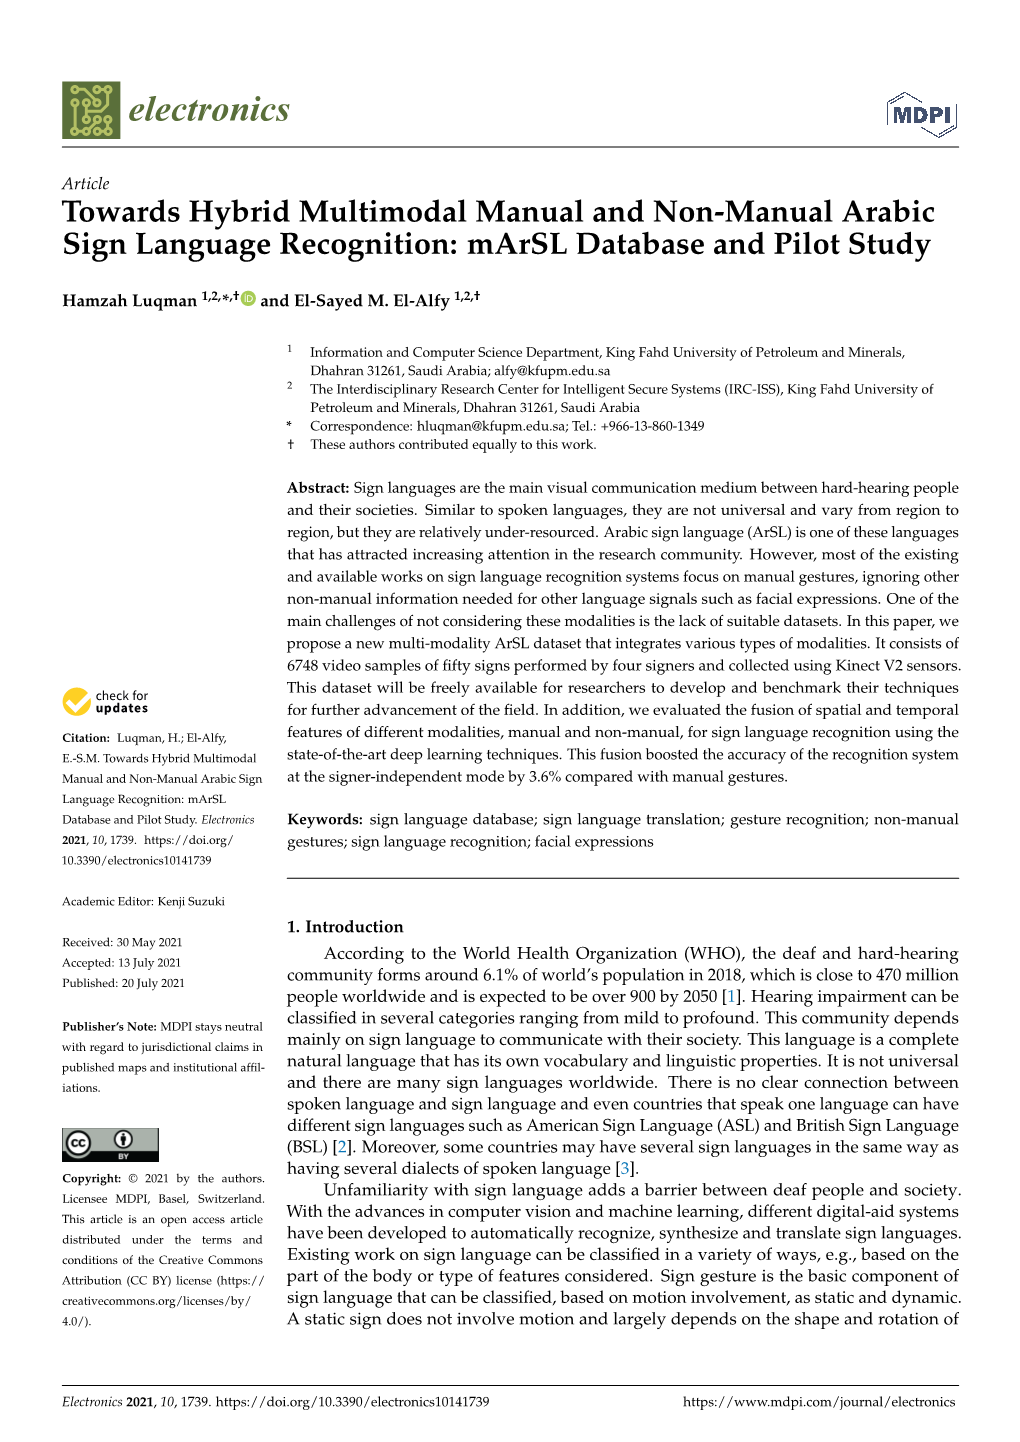 Towards Hybrid Multimodal Manual and Non-Manual Arabic Sign Language Recognition: Marsl Database and Pilot Study